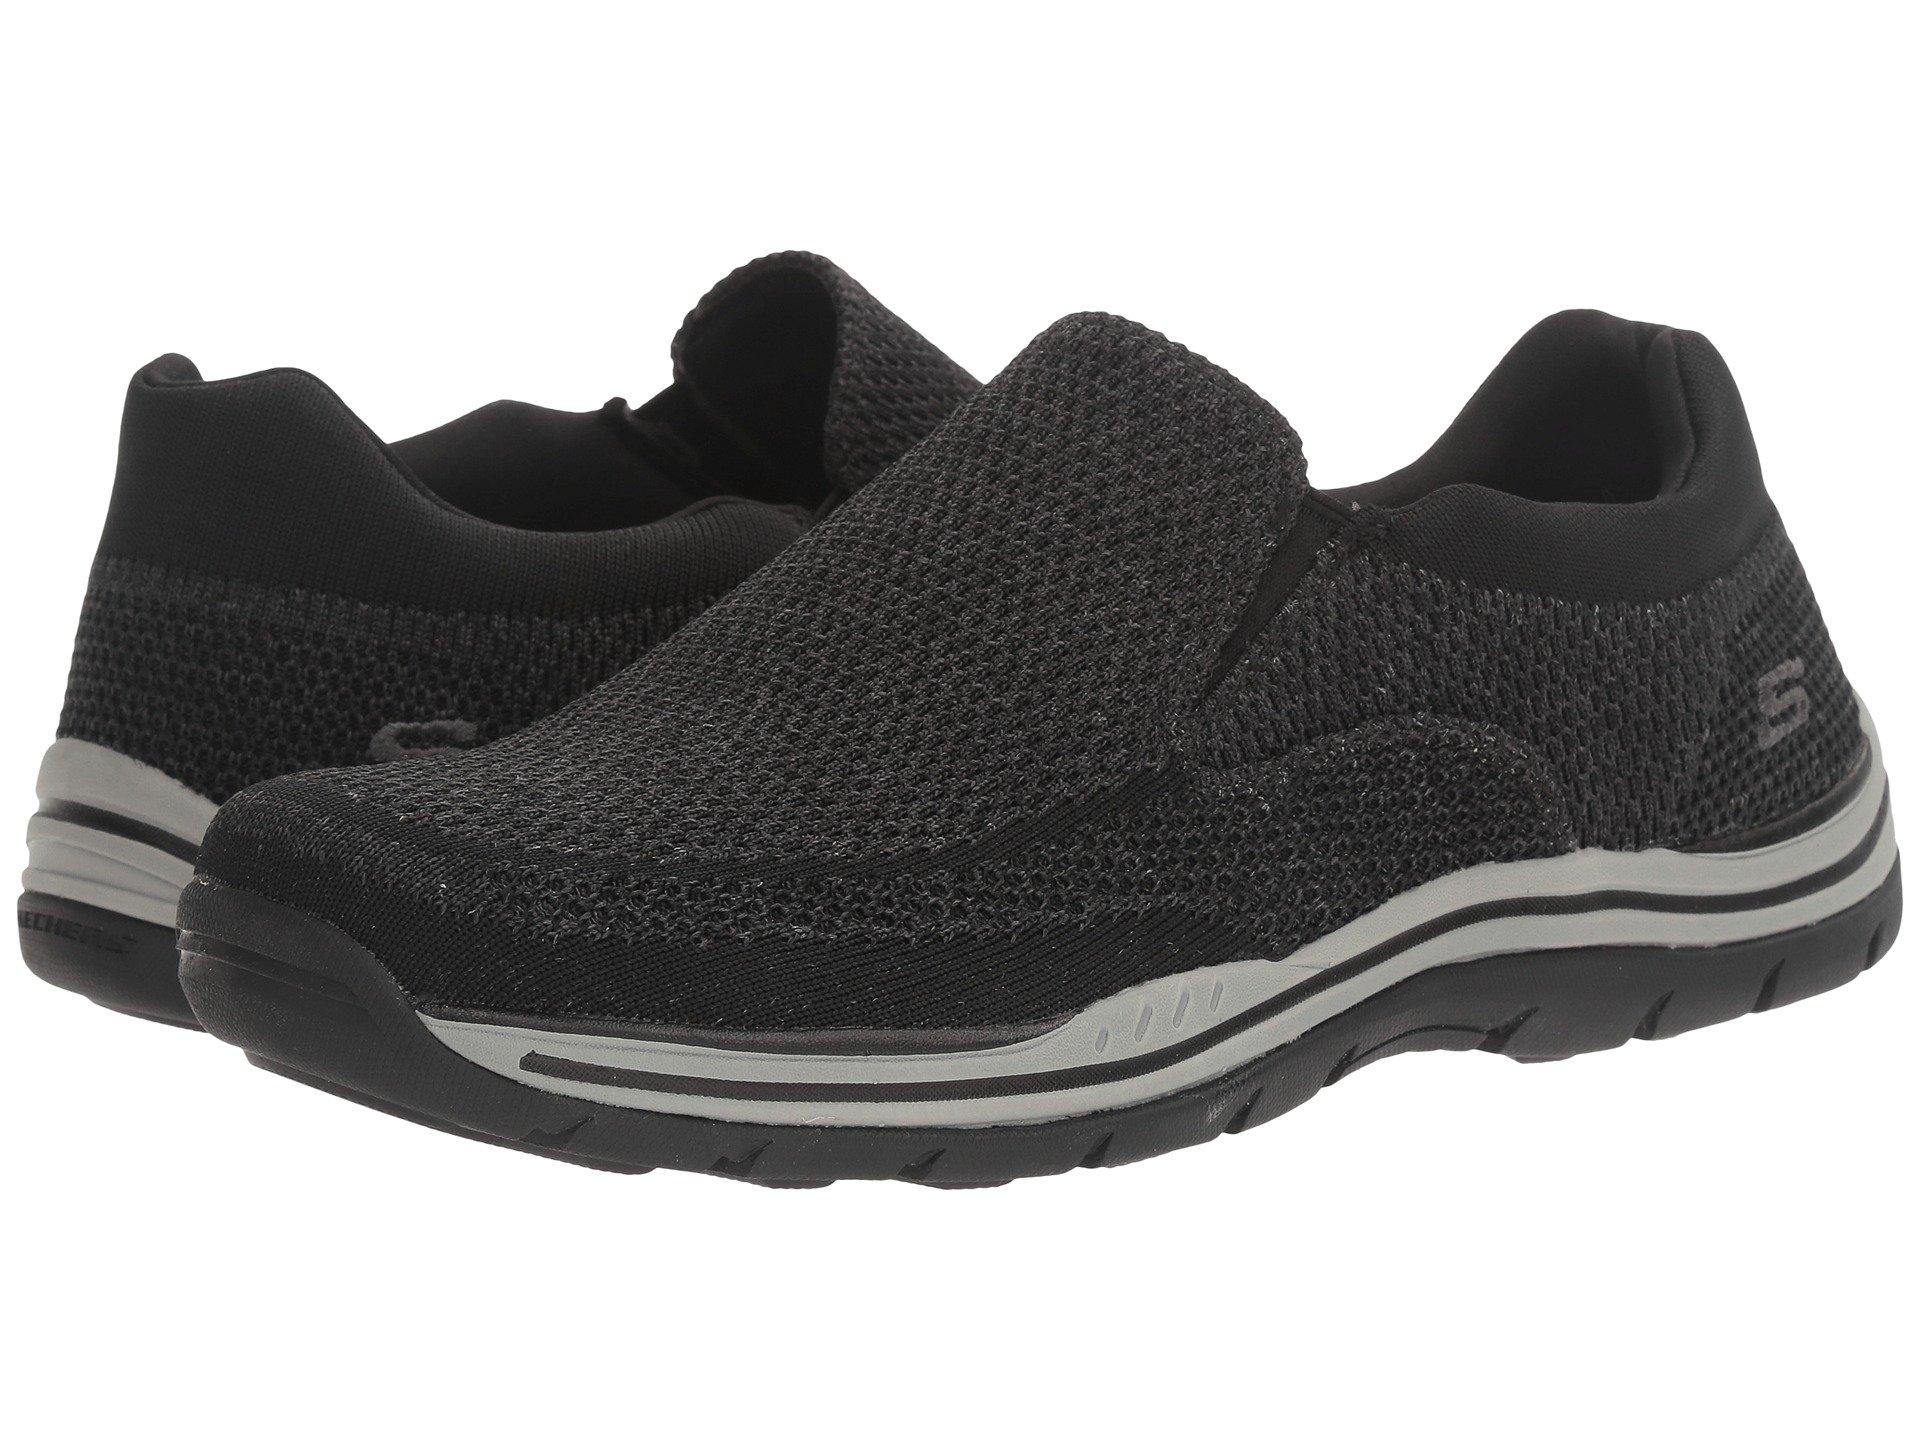 Skechers Rubber Relaxed Fit Expected - Gomel in Black for Men - Lyst